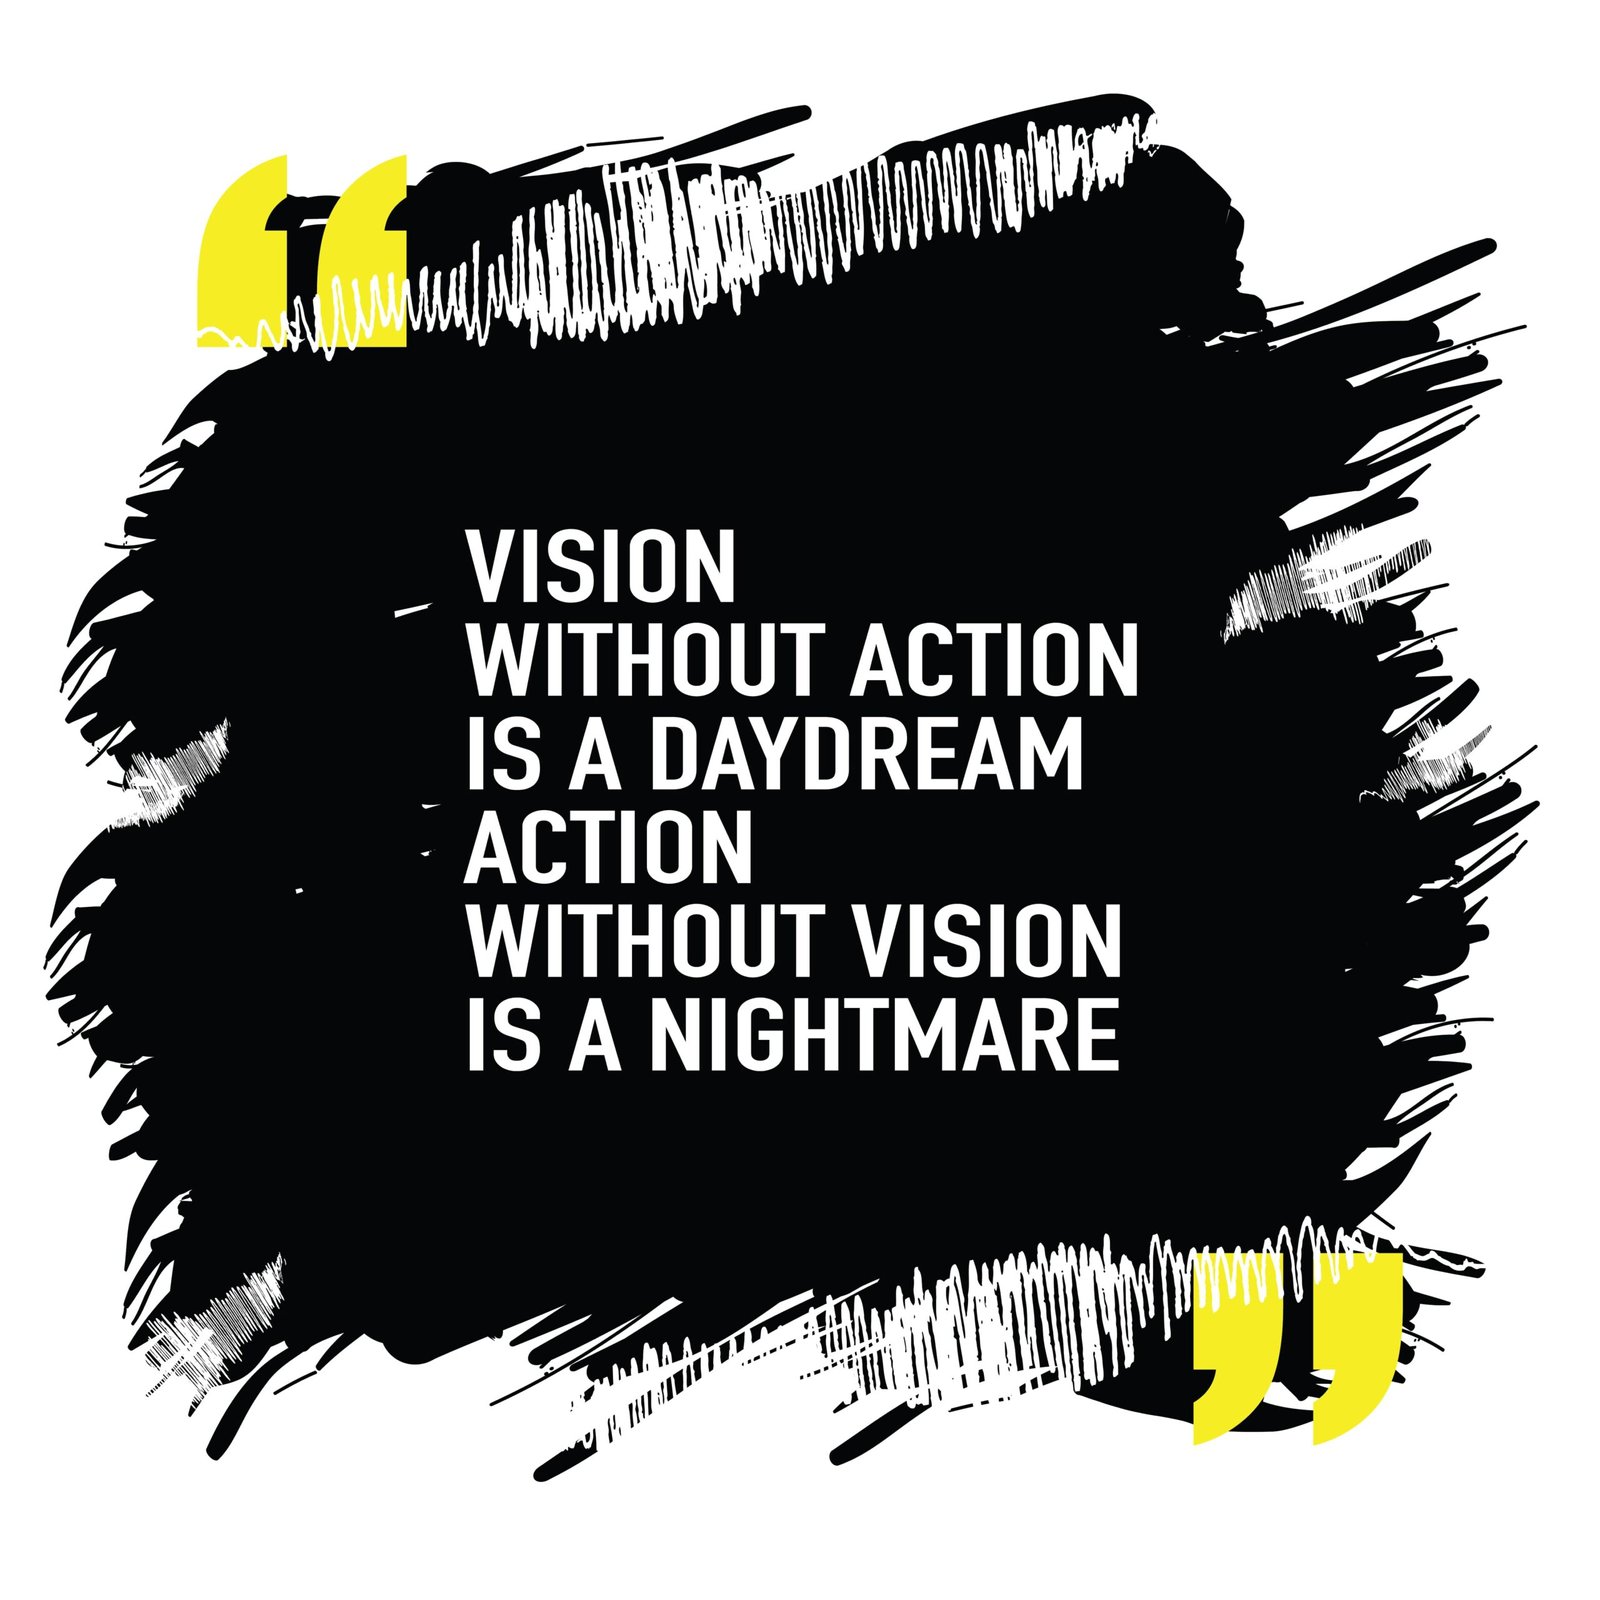 Vision without action is a daydream, action without vision is a nightmare opt